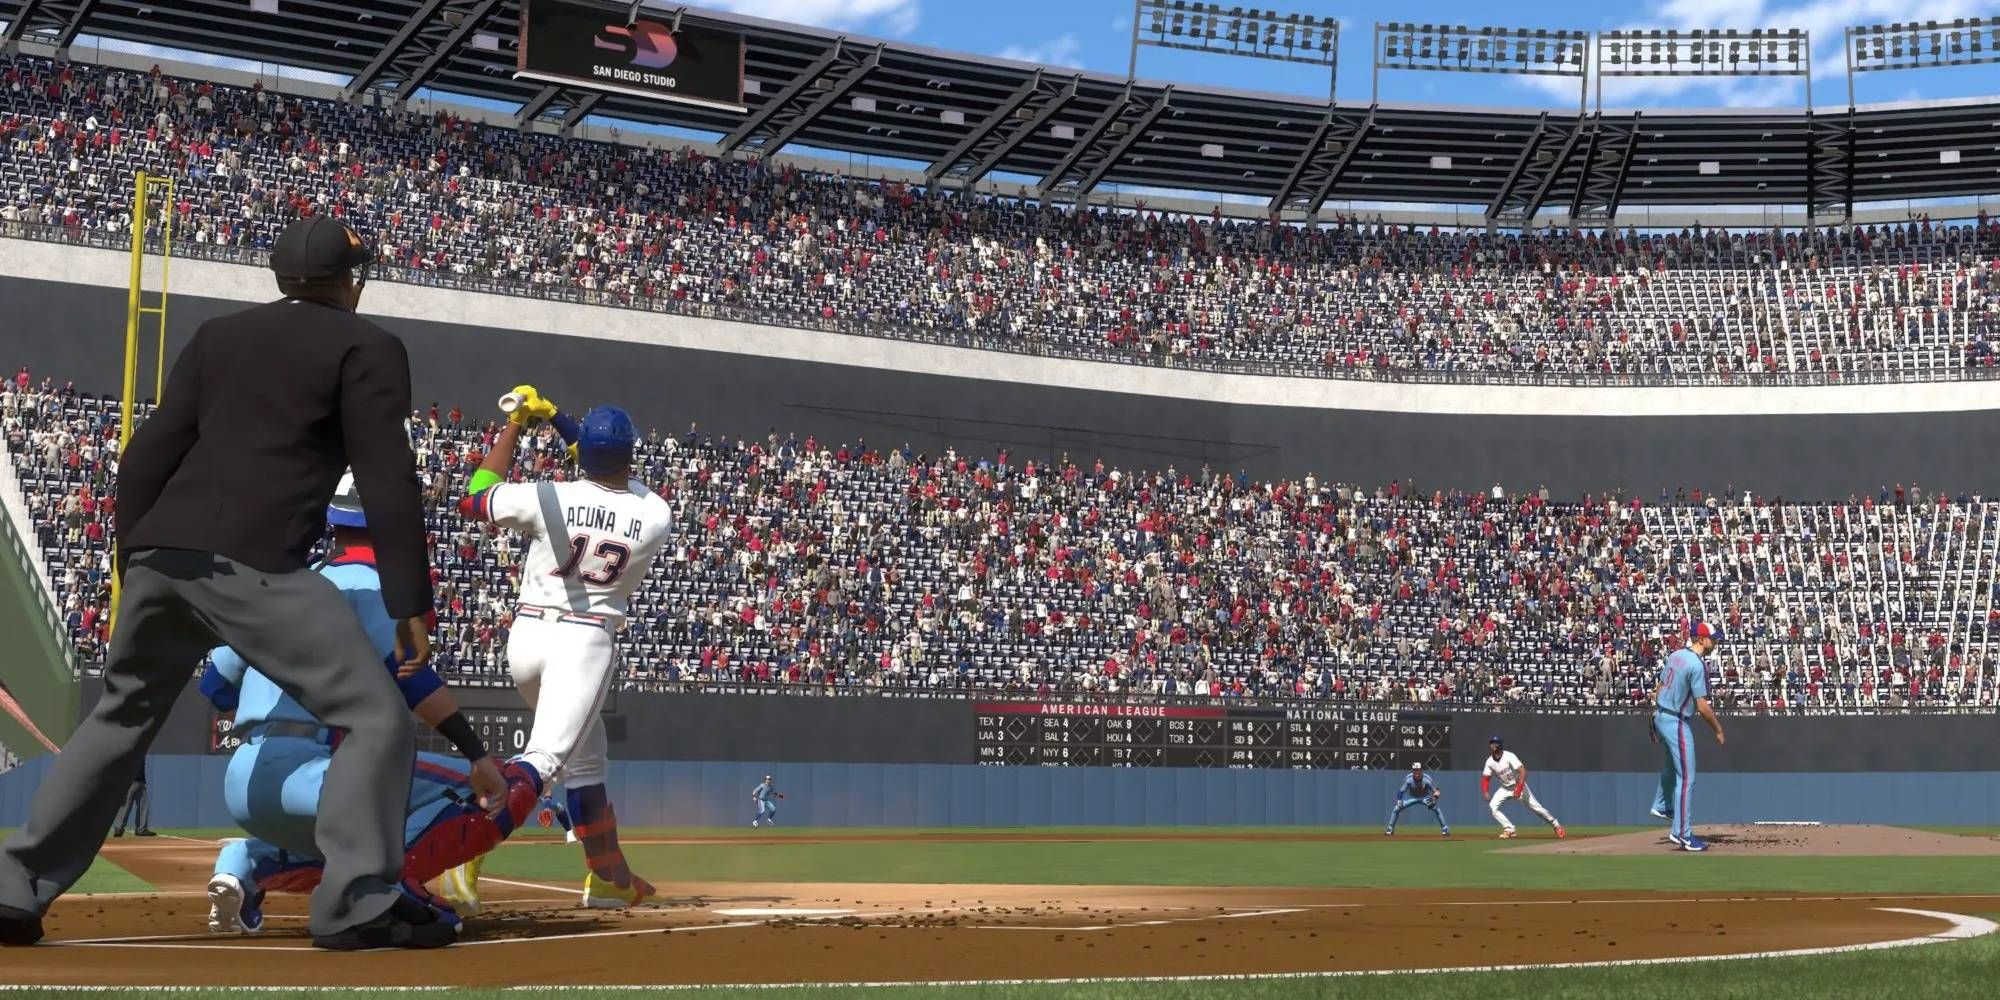 MLB The Show 23 Stadium View from Home Plate After Athlete Gets a Huge Hit